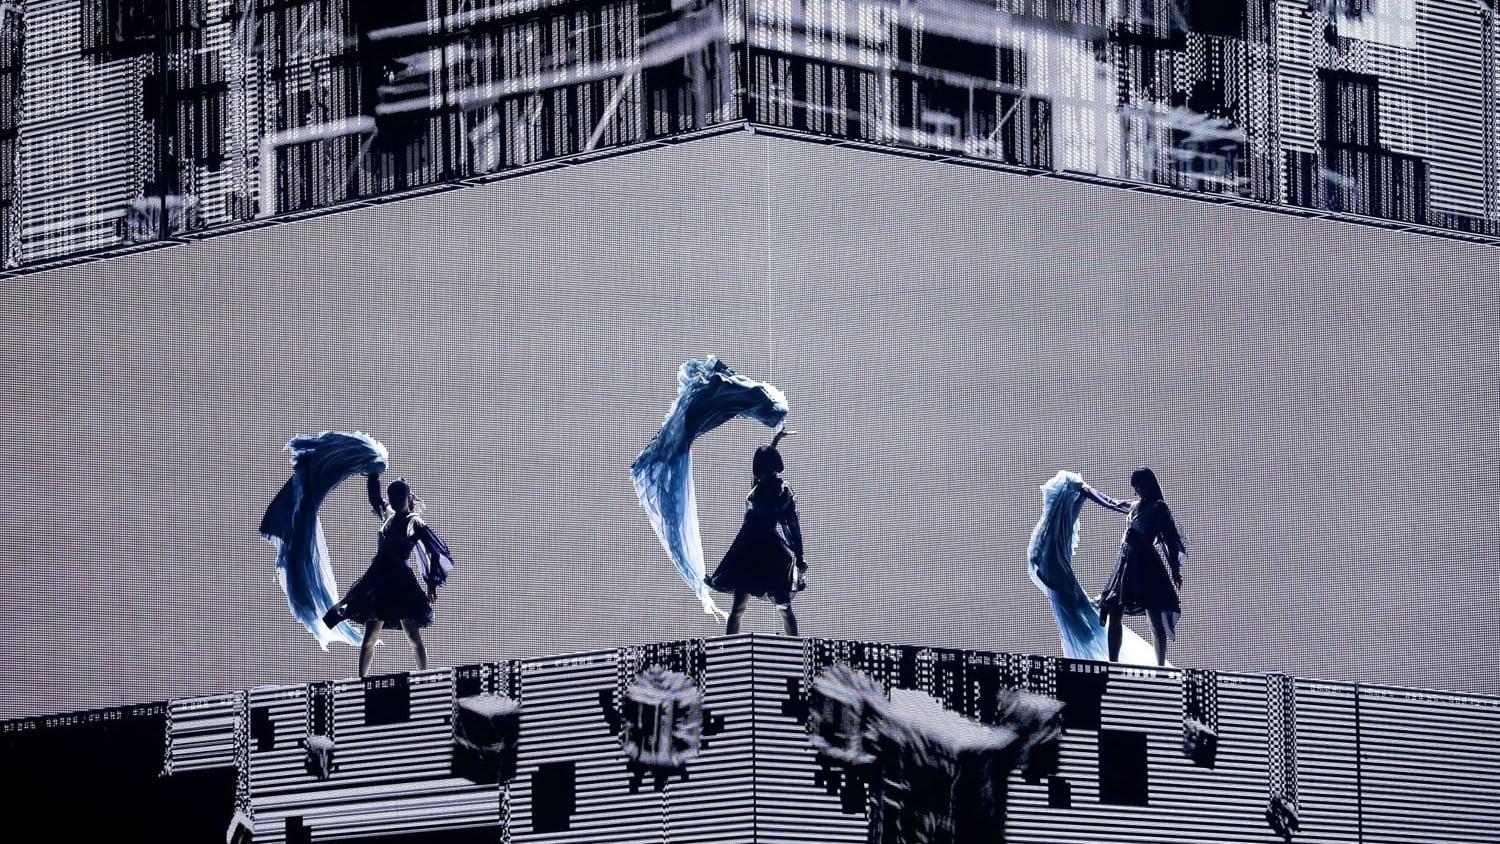 Perfume 8th Tour 2020 “P Cubed” in Dome backdrop